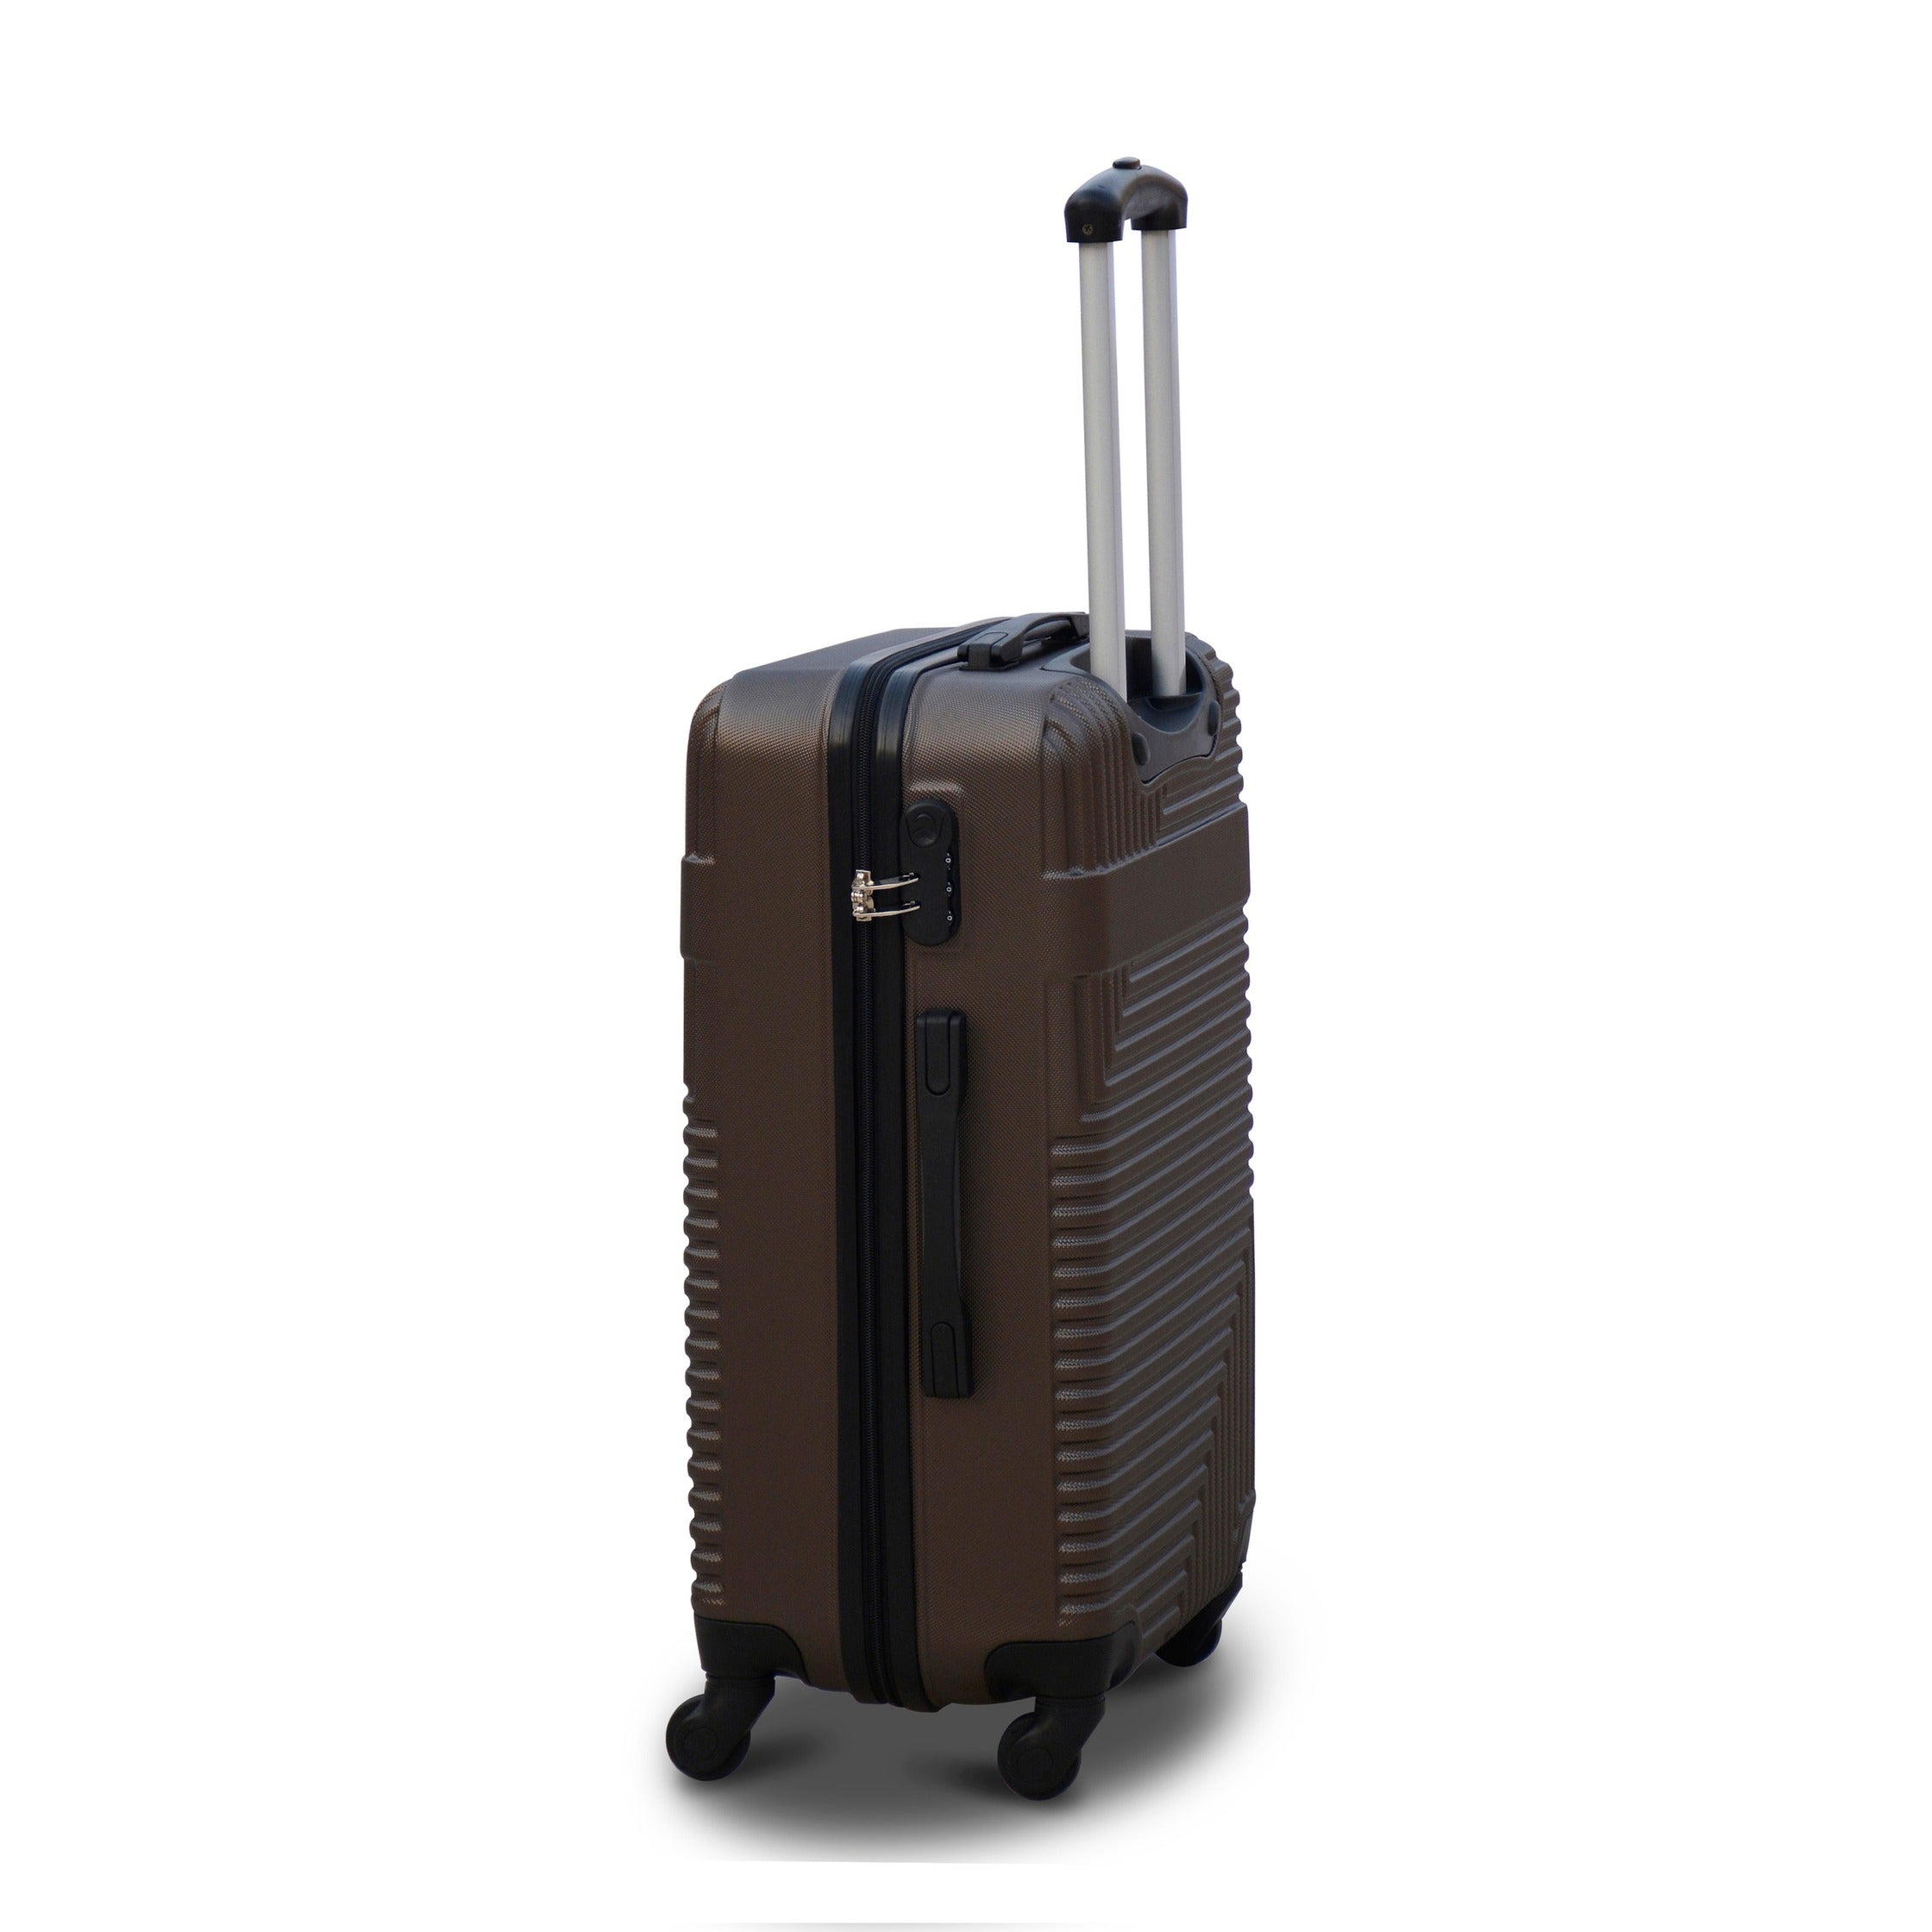 24" Brown Colour Travel Way ABS Luggage Lightweight Hard Case Spinner Wheel Trolley Bag